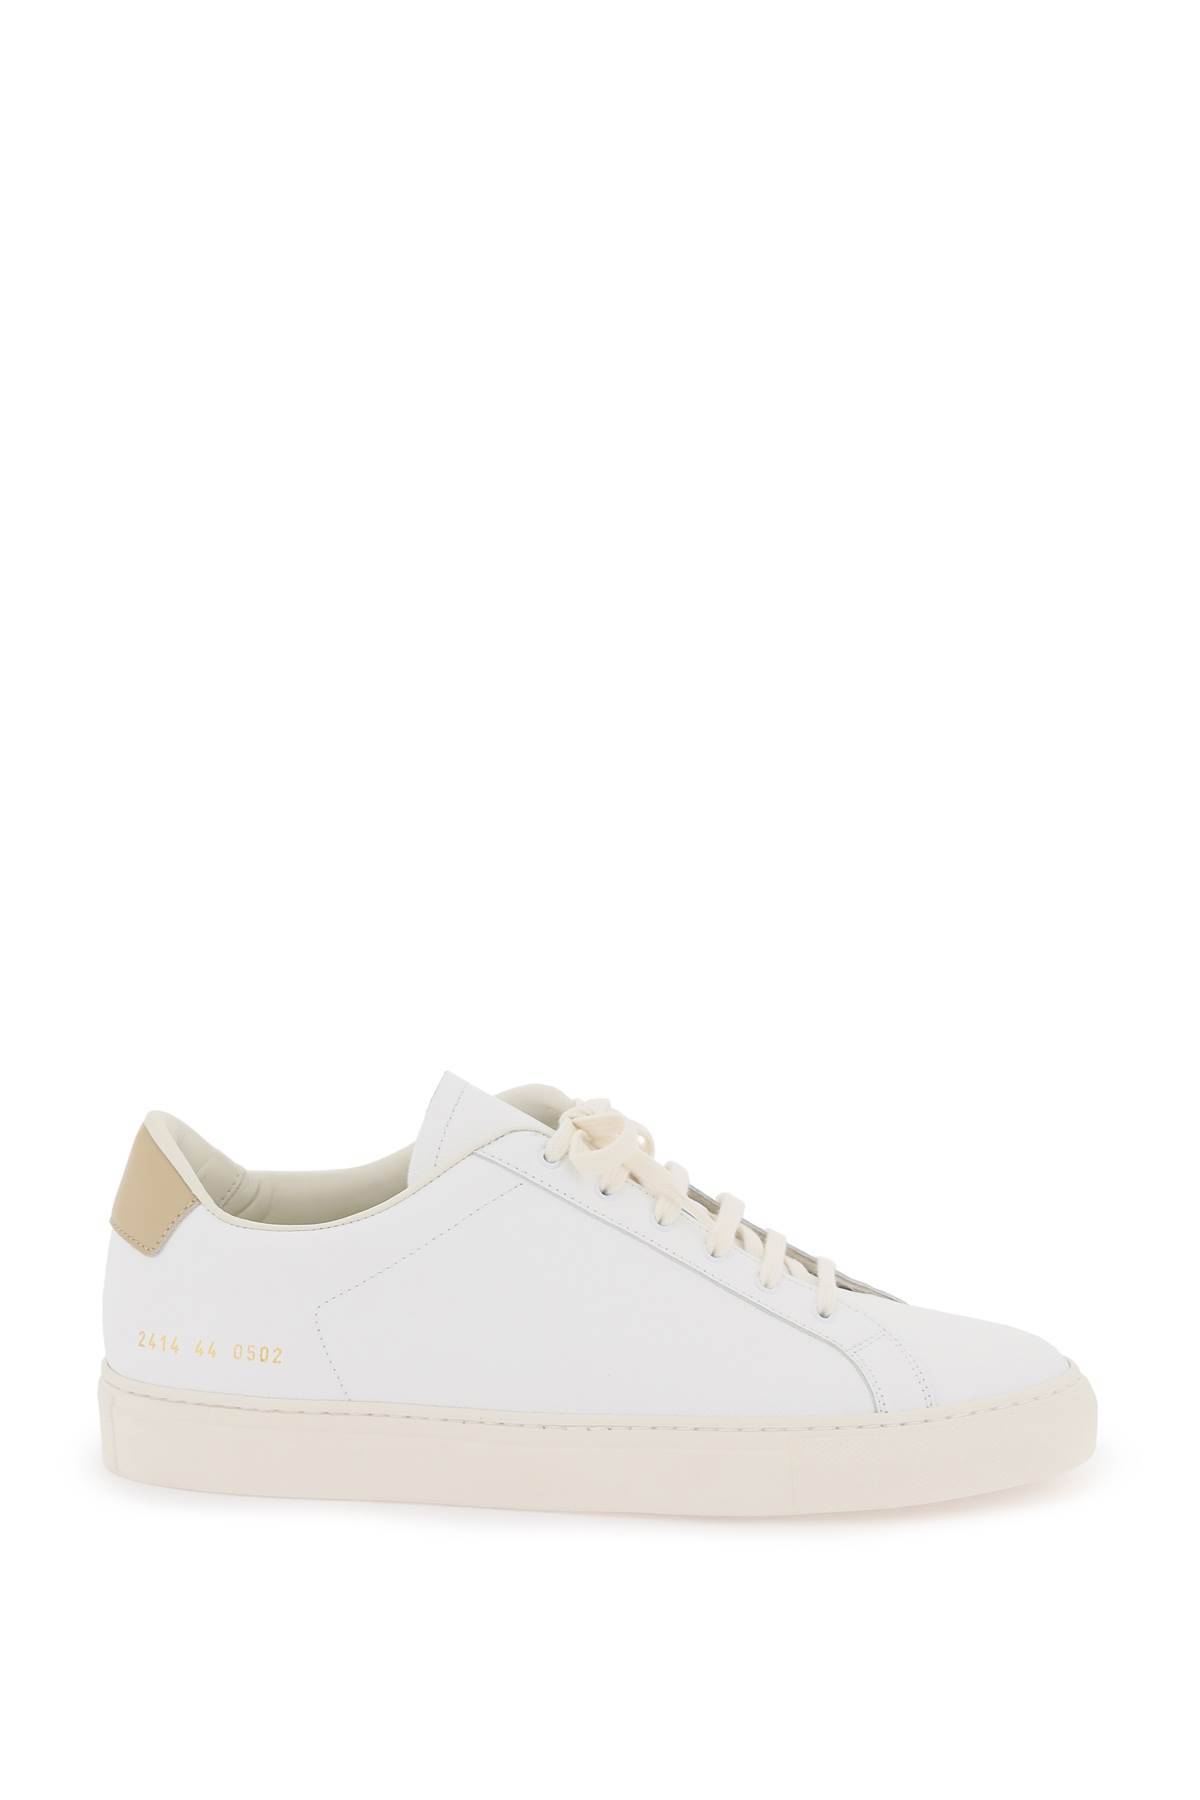 COMMON PROJECTS retro low top sne